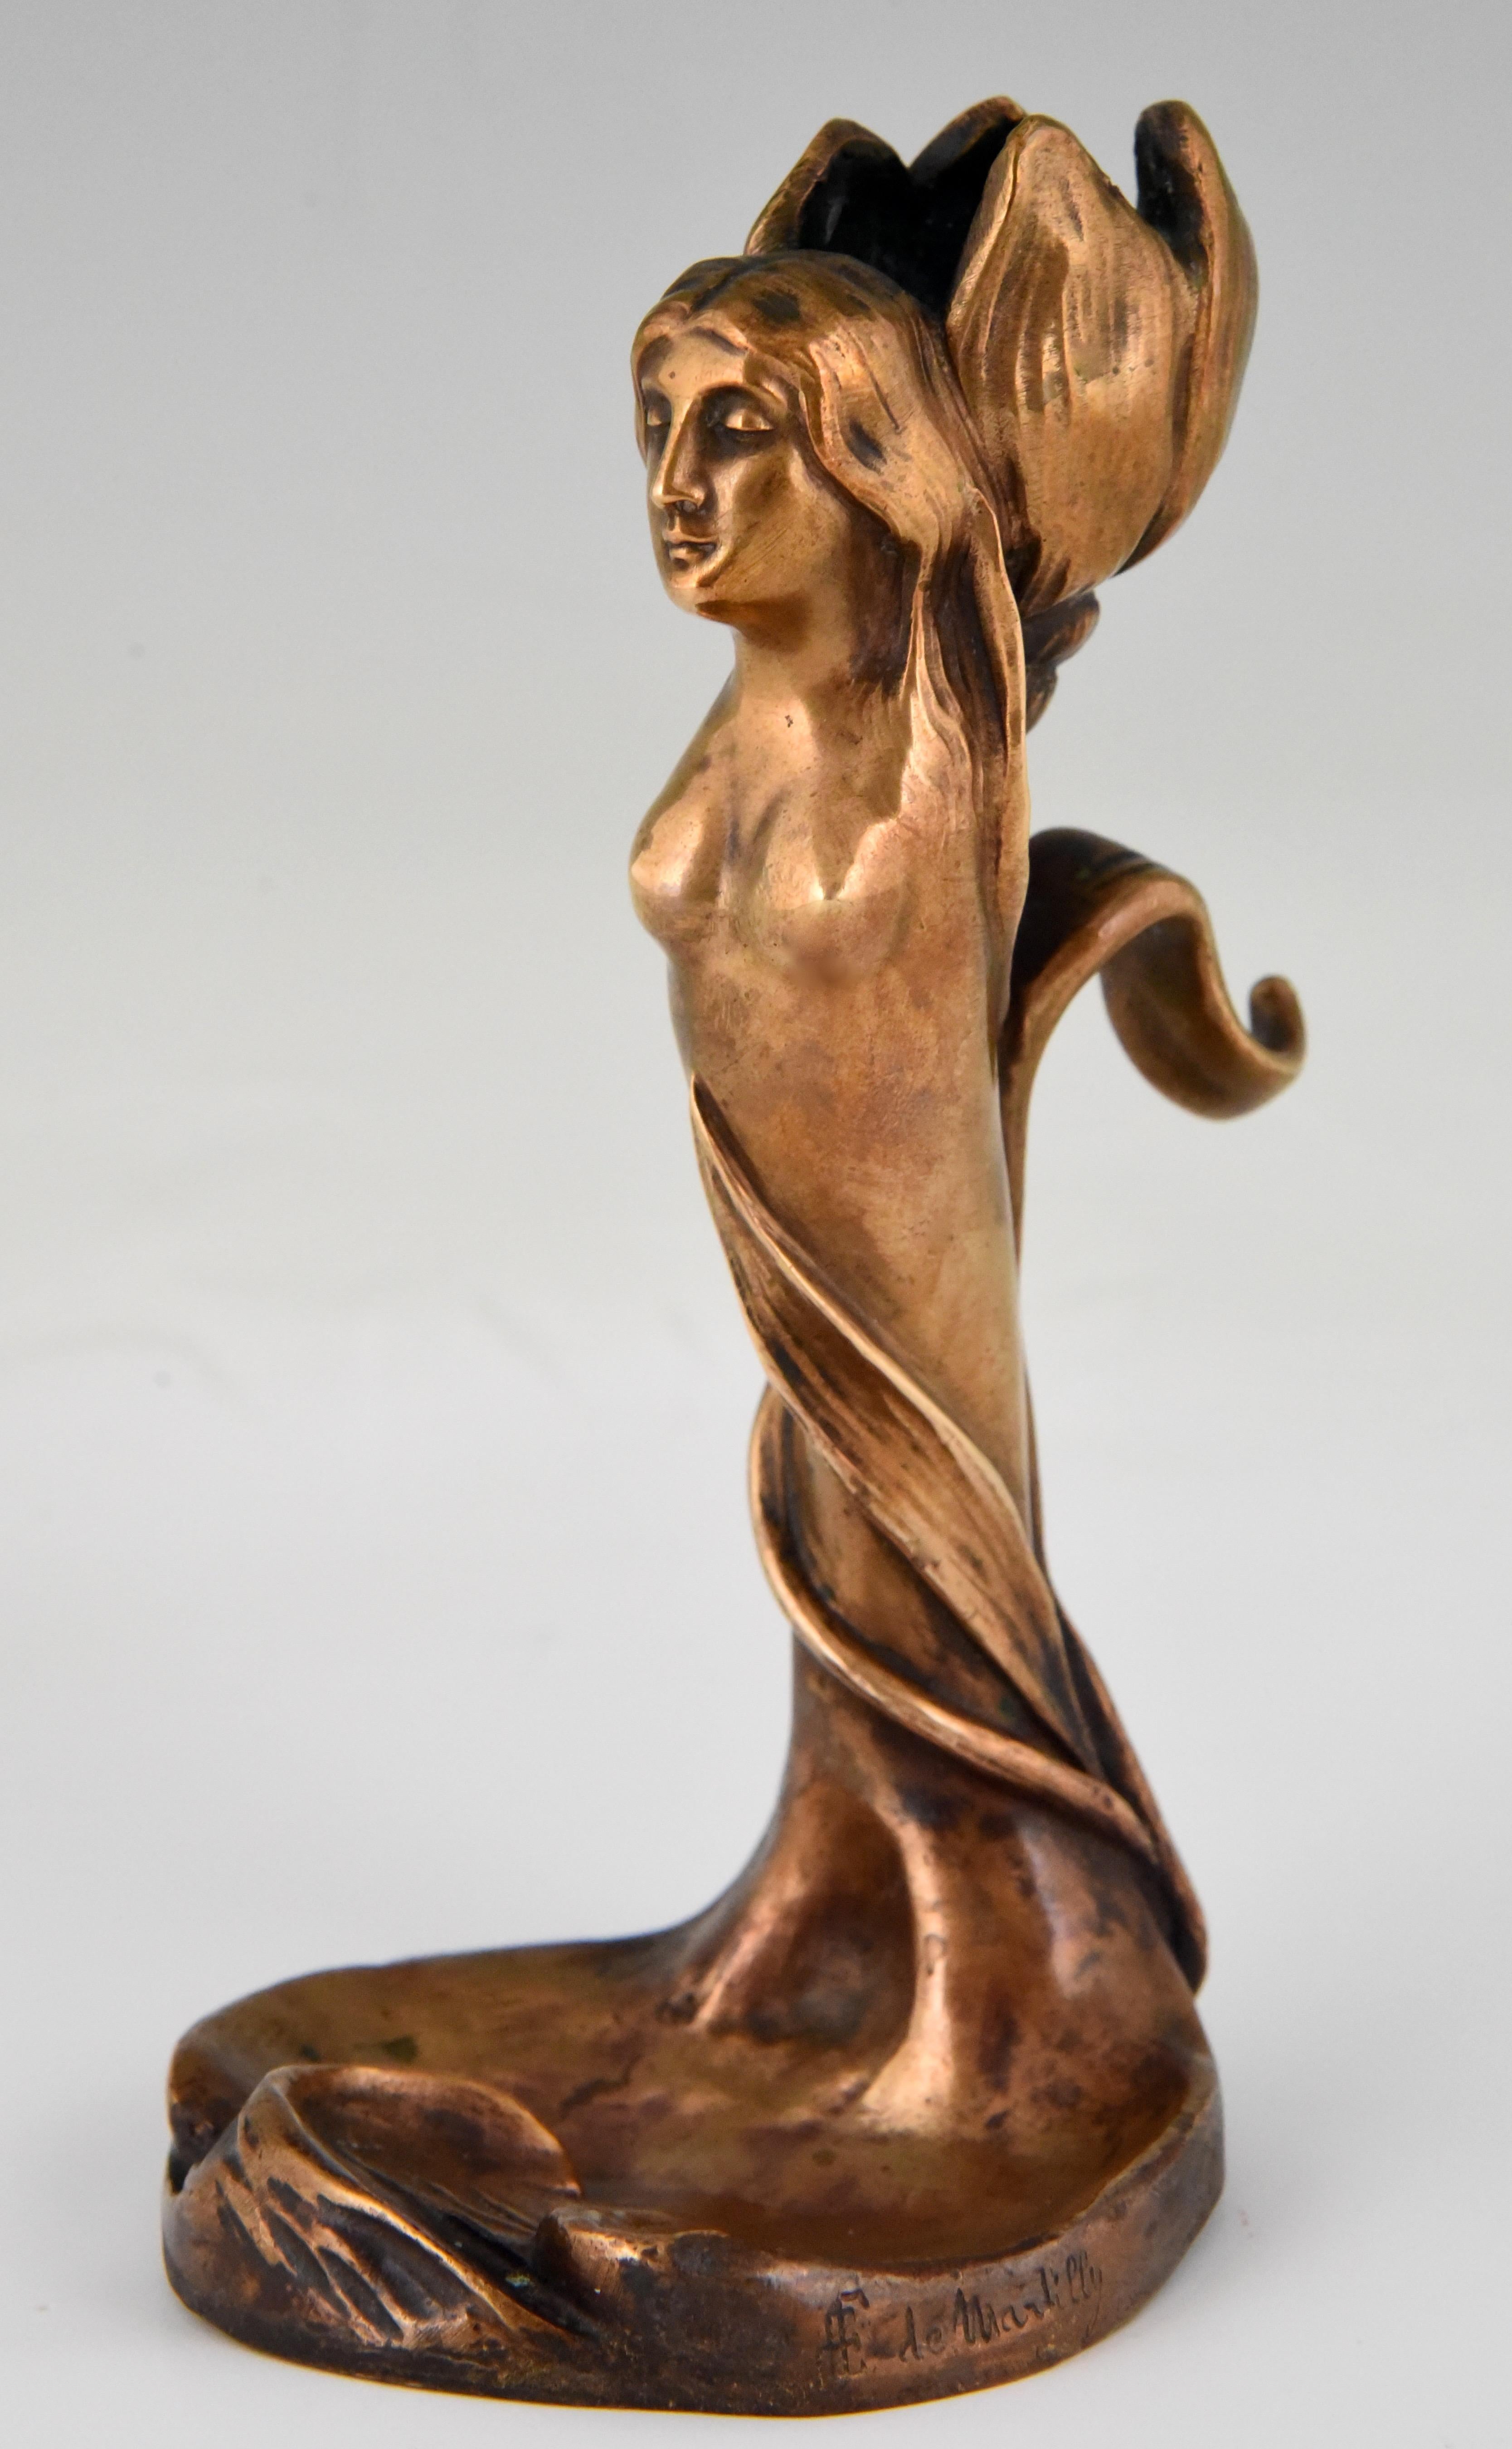 Art Nouveau bronze candlestick with nude and flower signed by the French artist Edouard de Martilly, circa 1900.